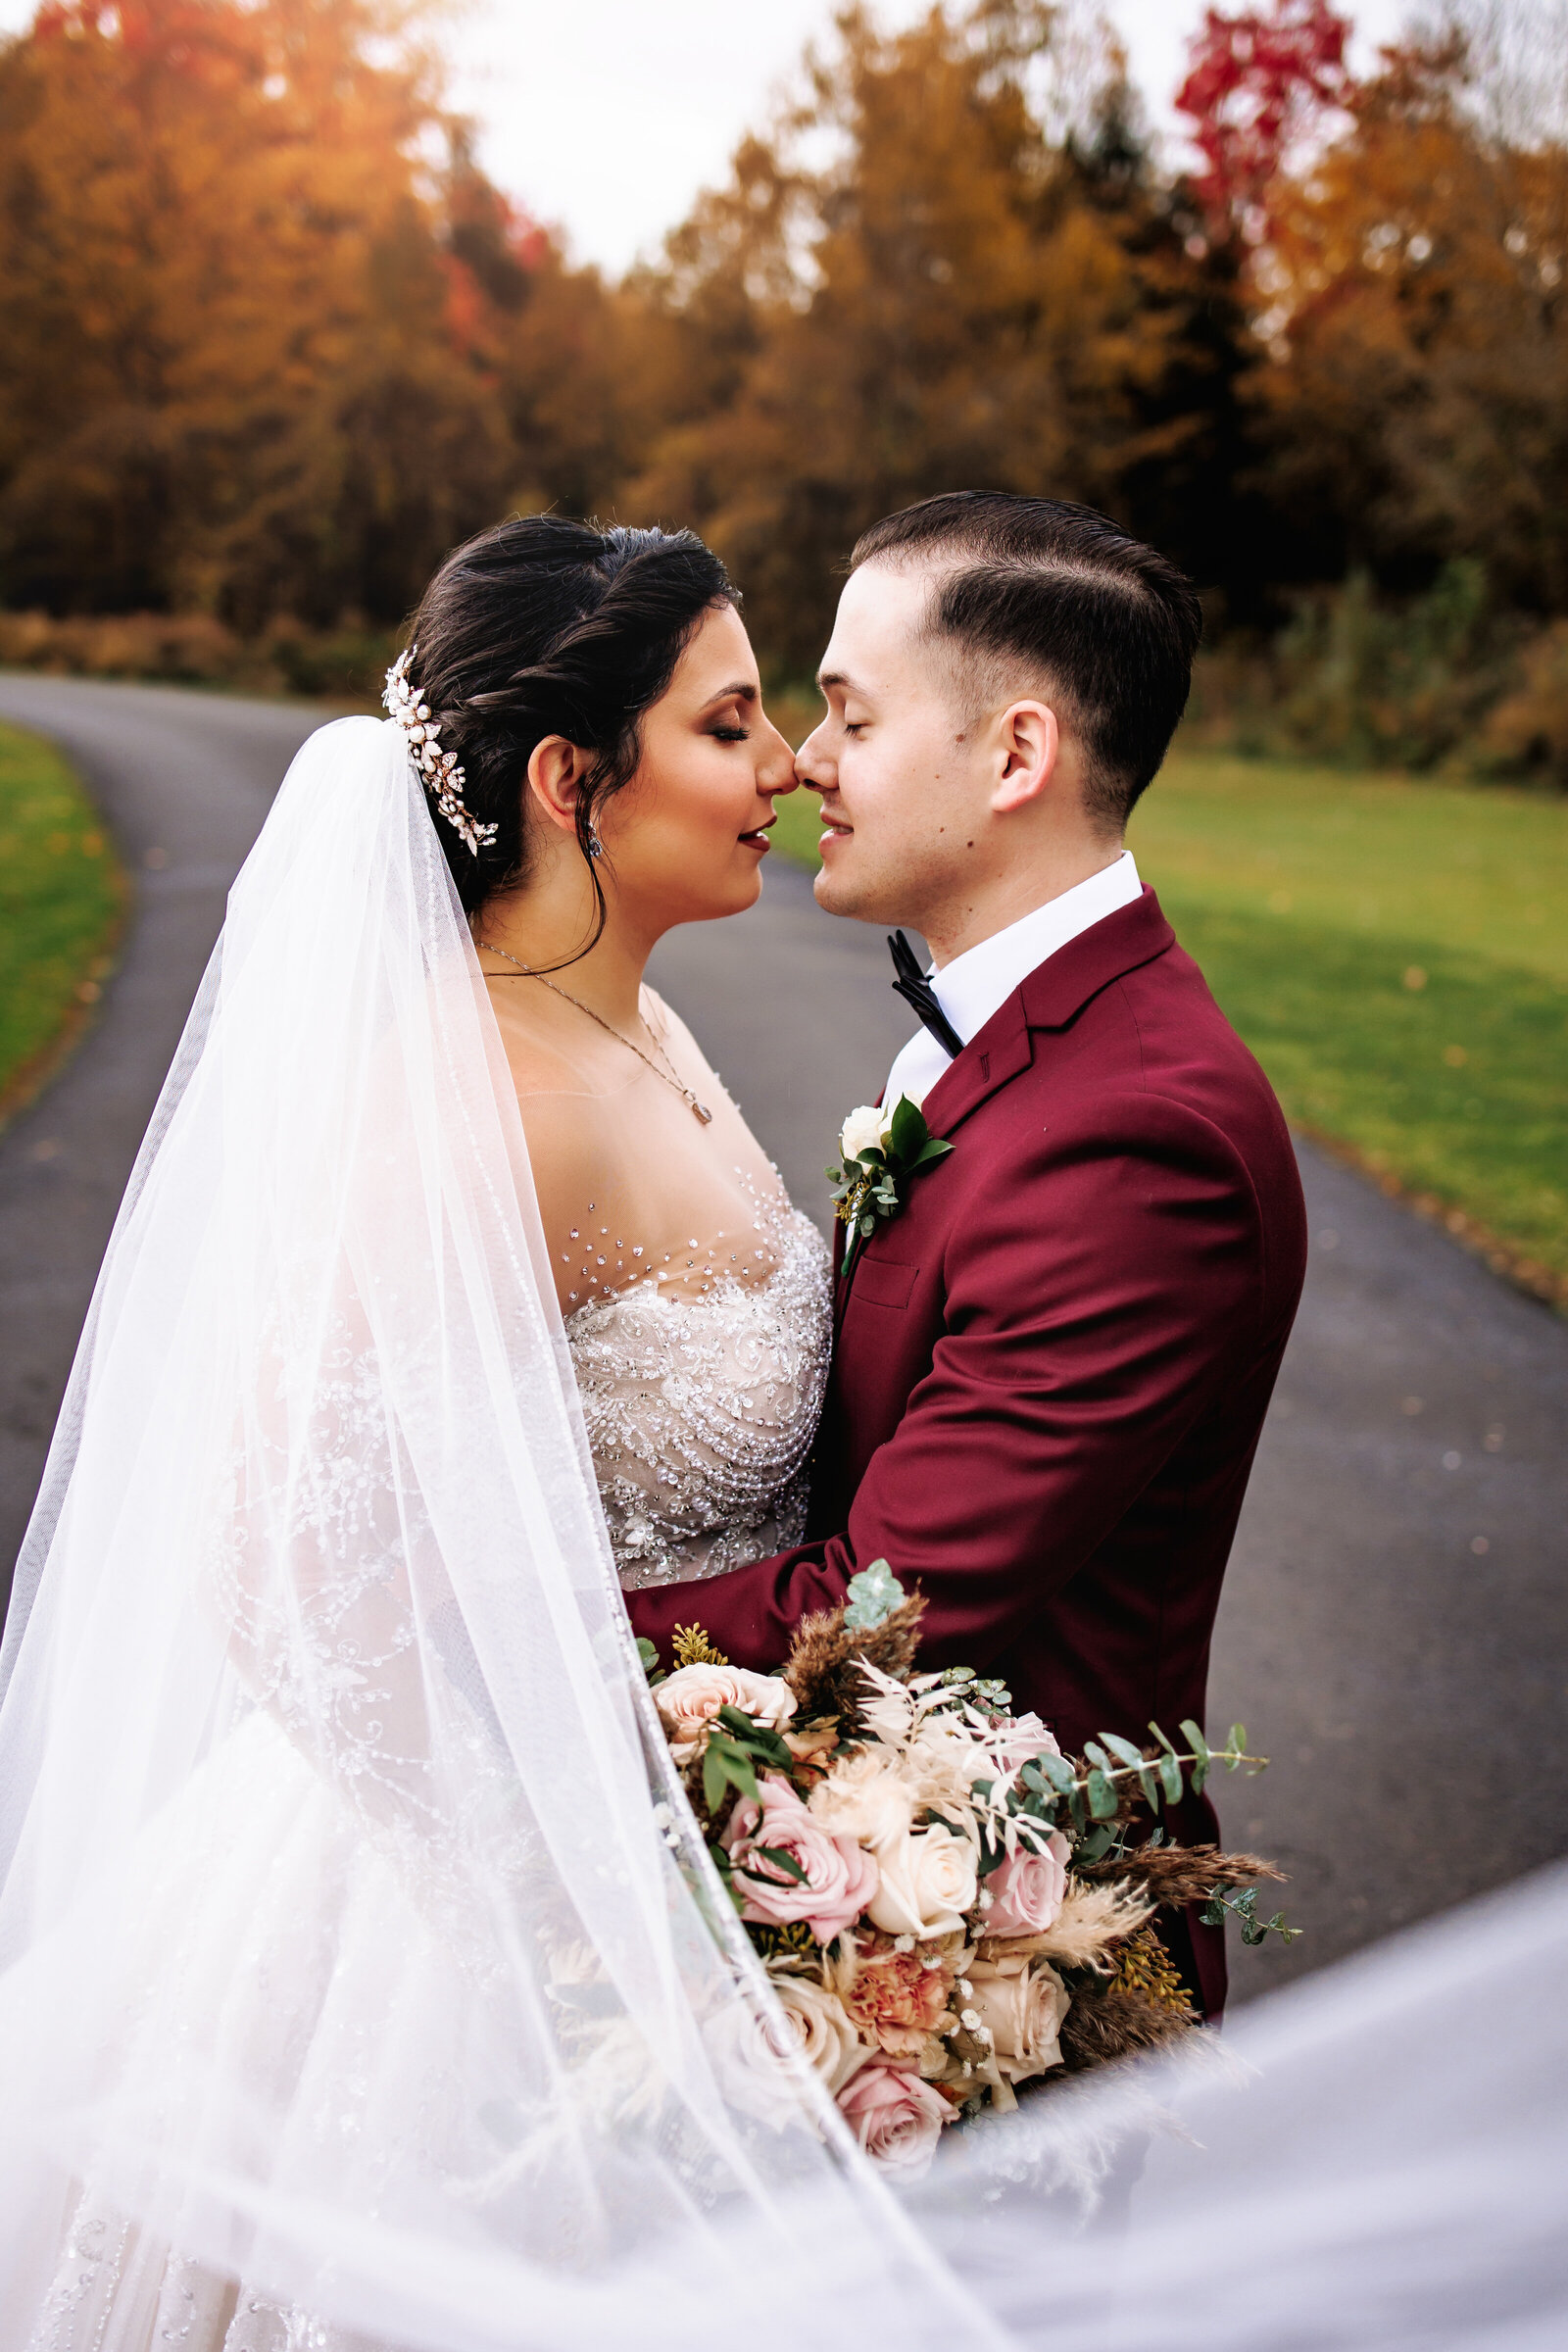 Bride and groom go in for a kiss amongst the beautiful fall foliage on their wedding day